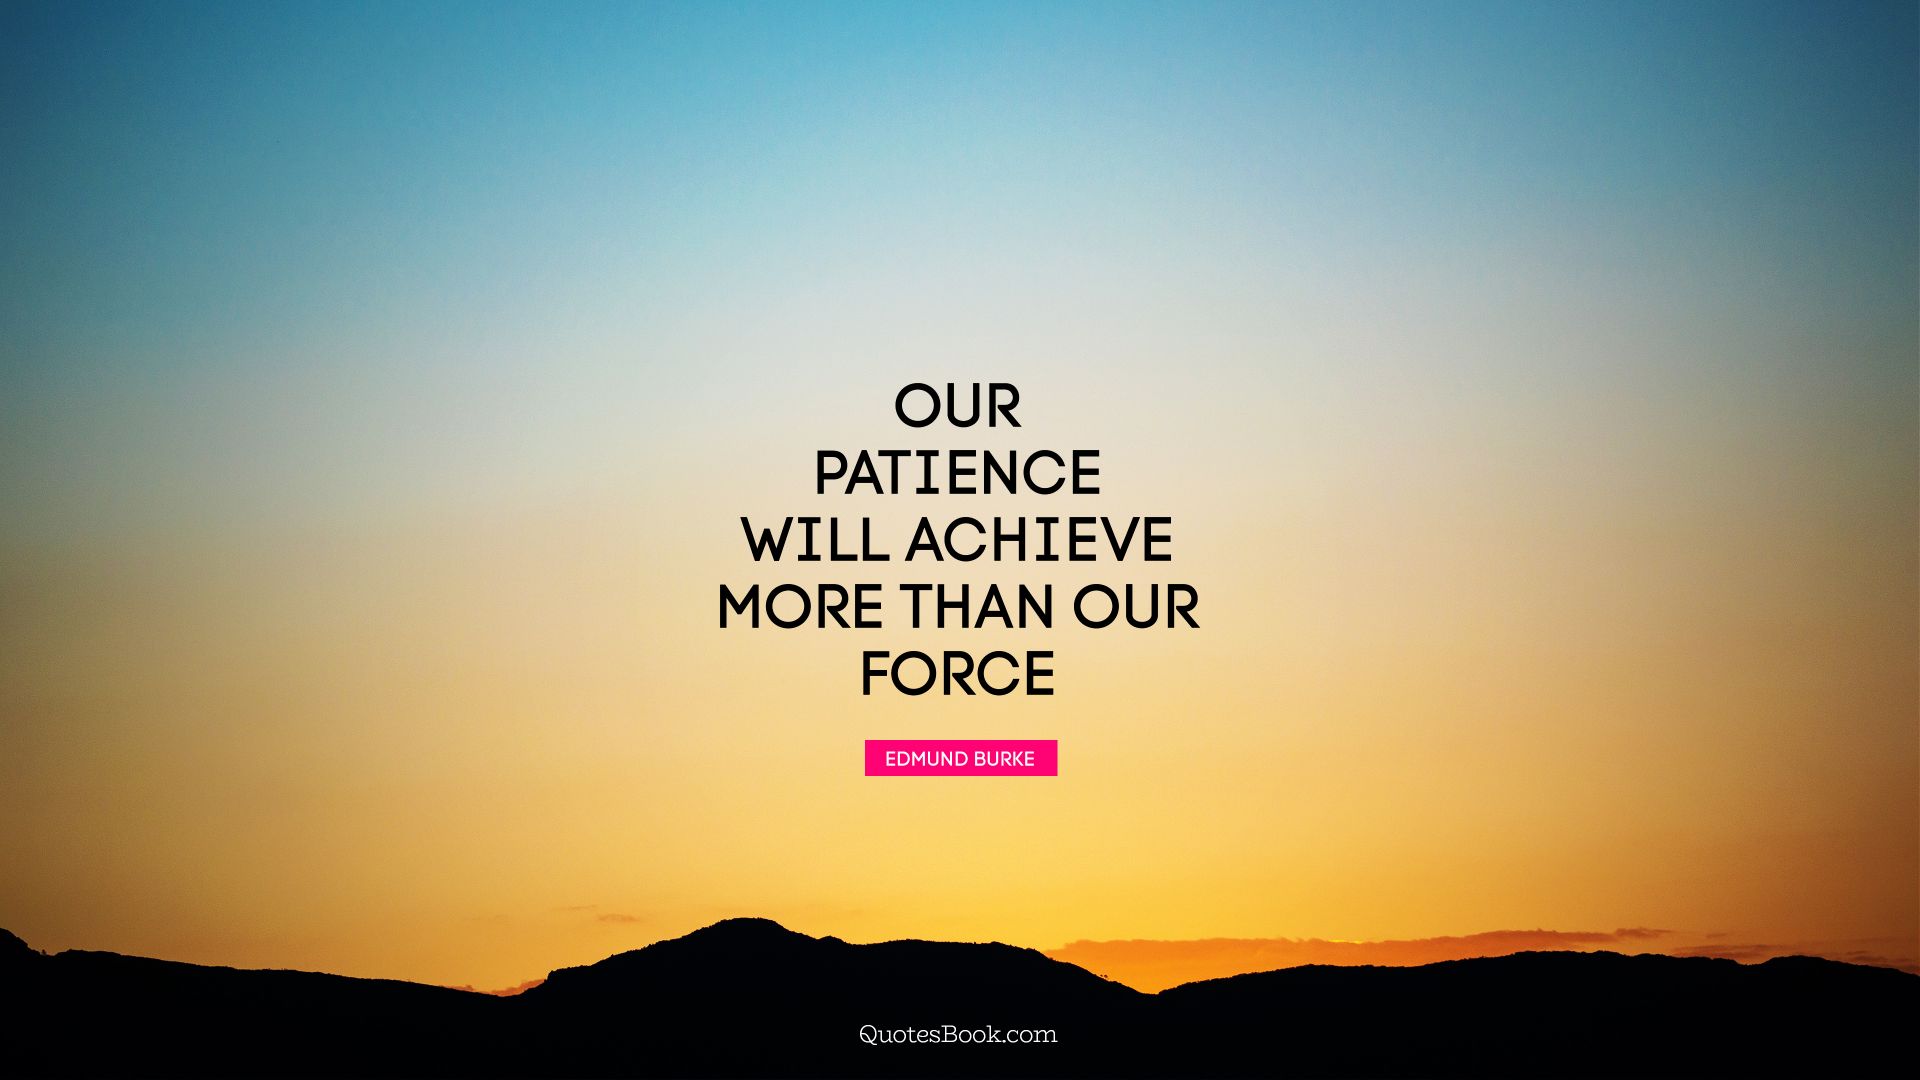 Our patience will achieve more than our force. - Quote by Edmund Burke